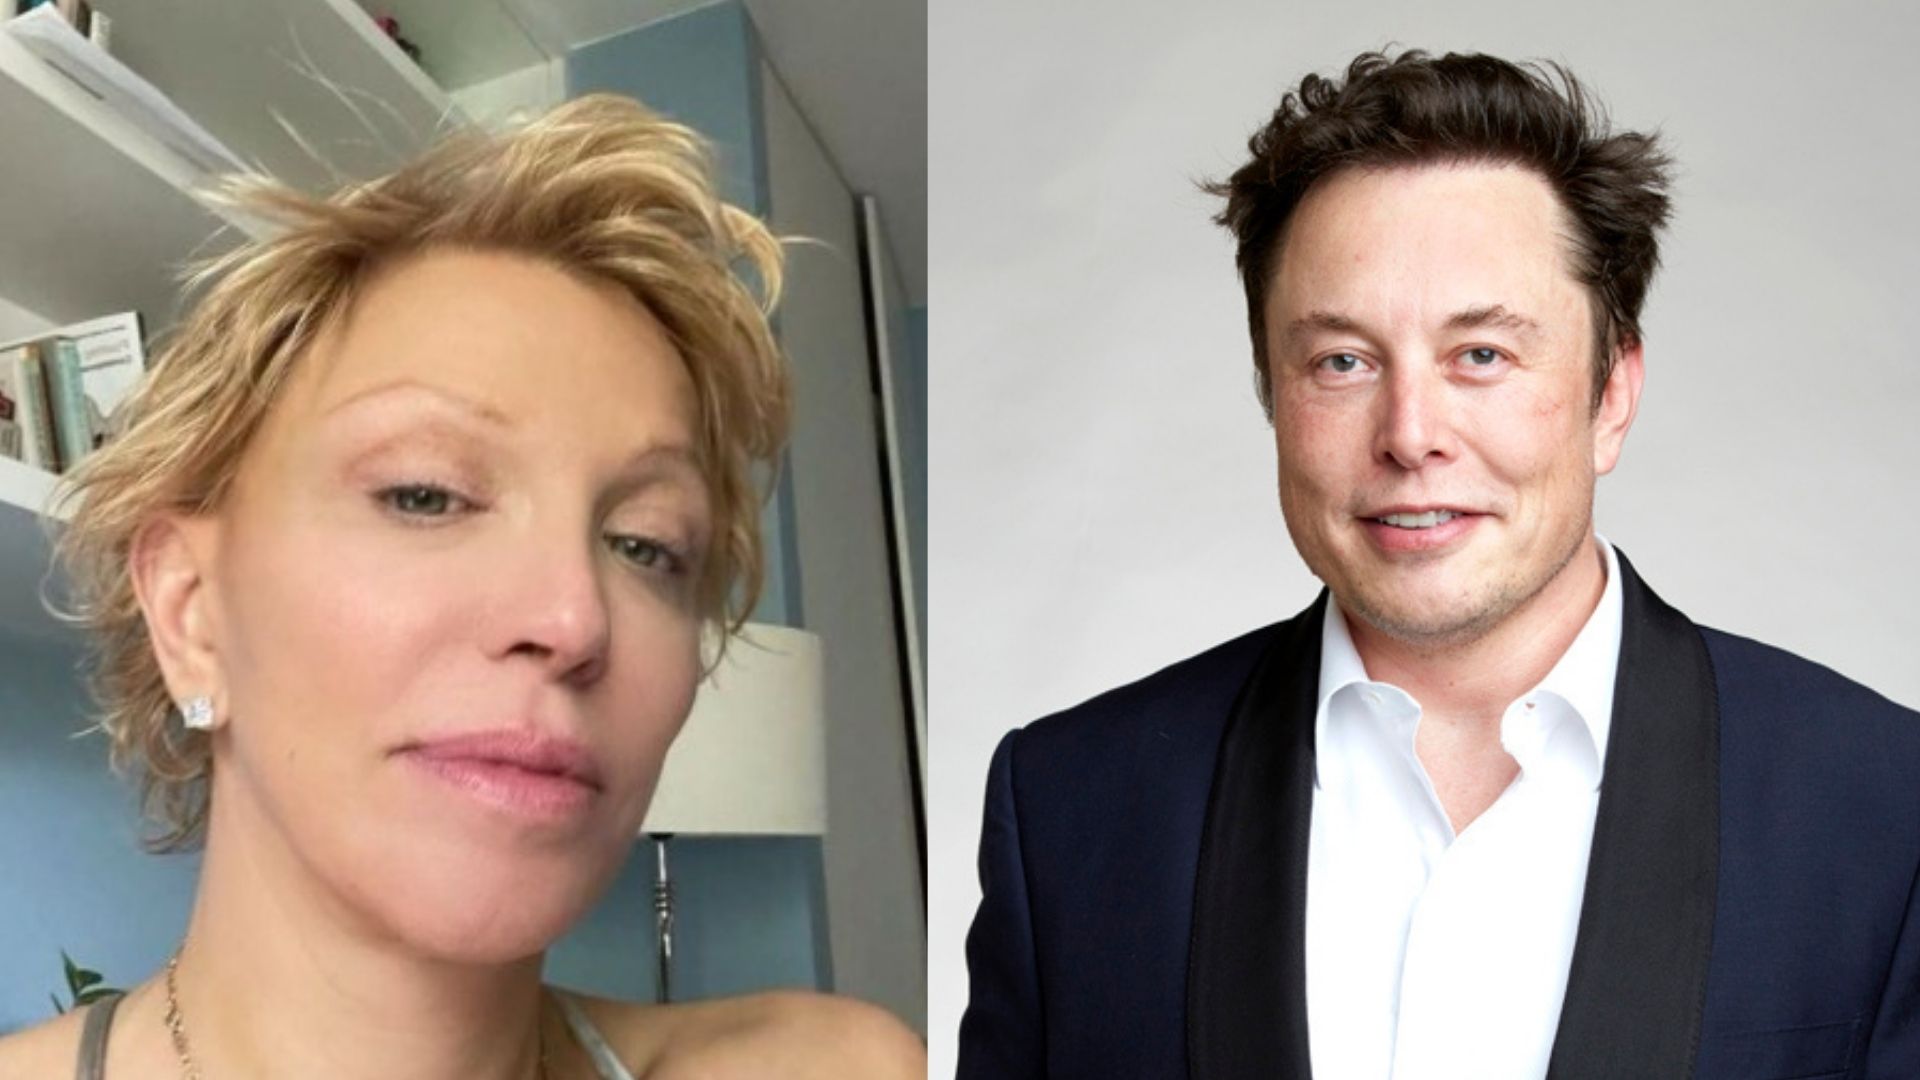 Courtney Love claims to have Elon Musk's mysterious emails